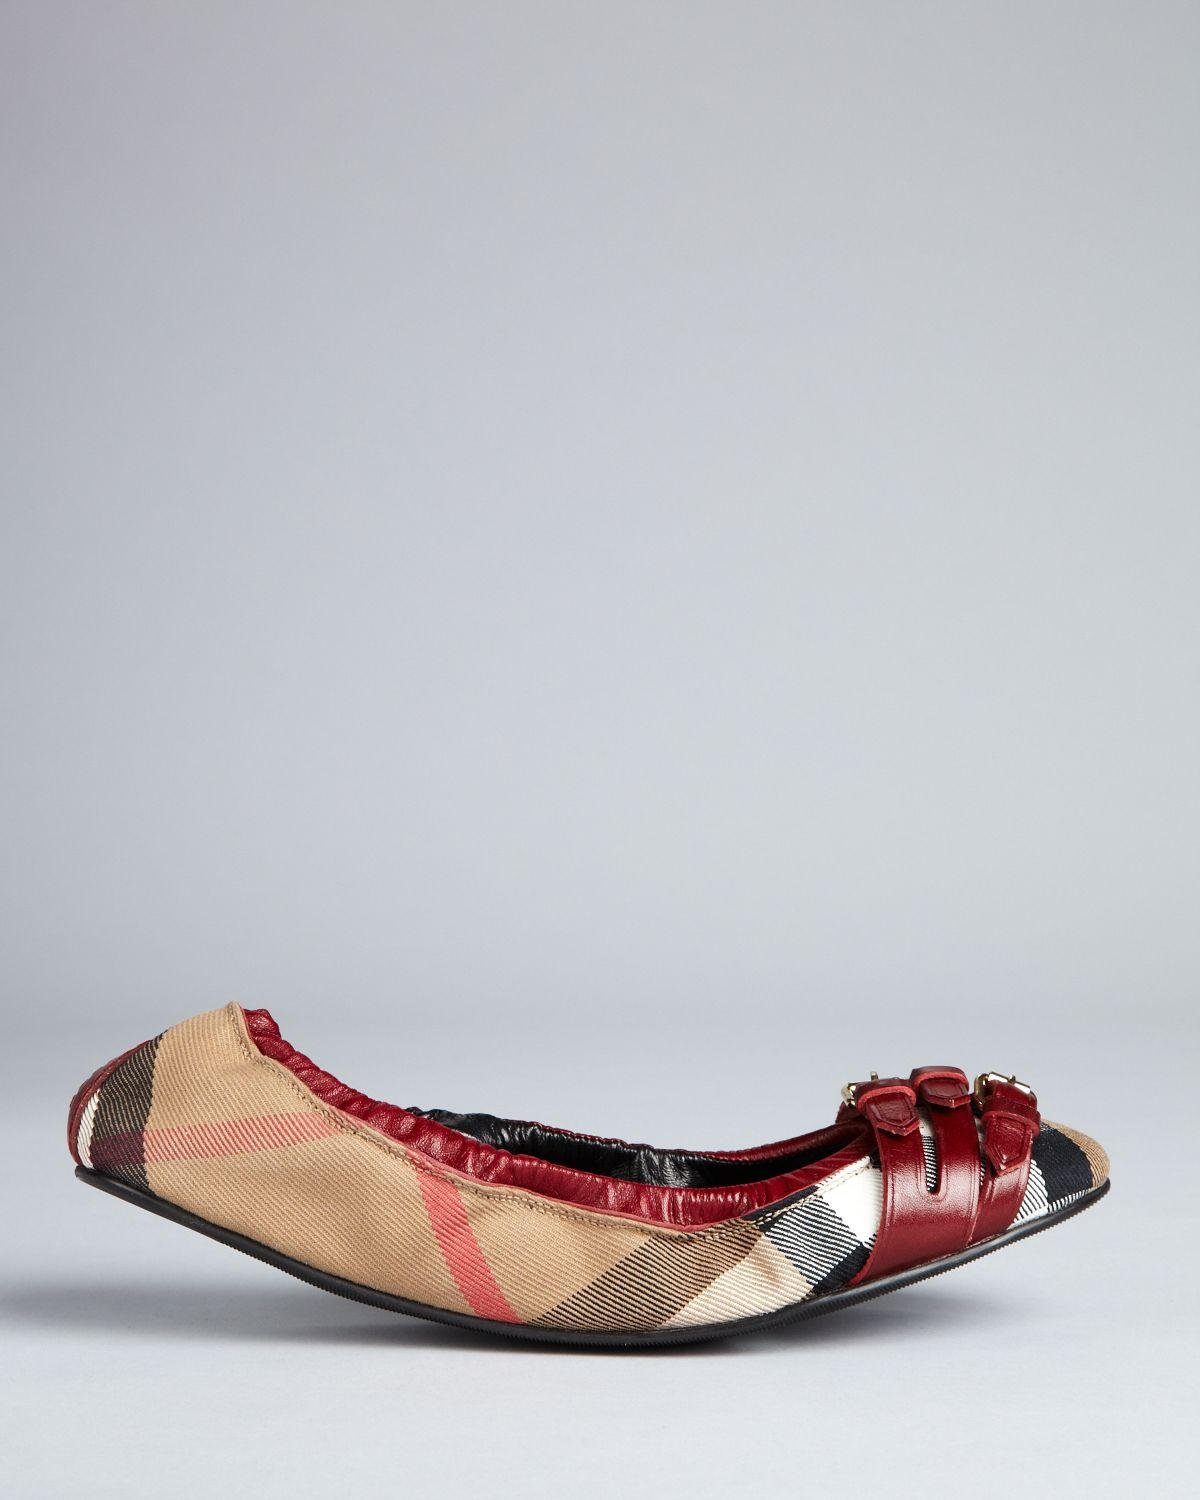 langs projector decaan Burberry Ballerina Flats Bridle Housecheck Falcony in Brown | Lyst